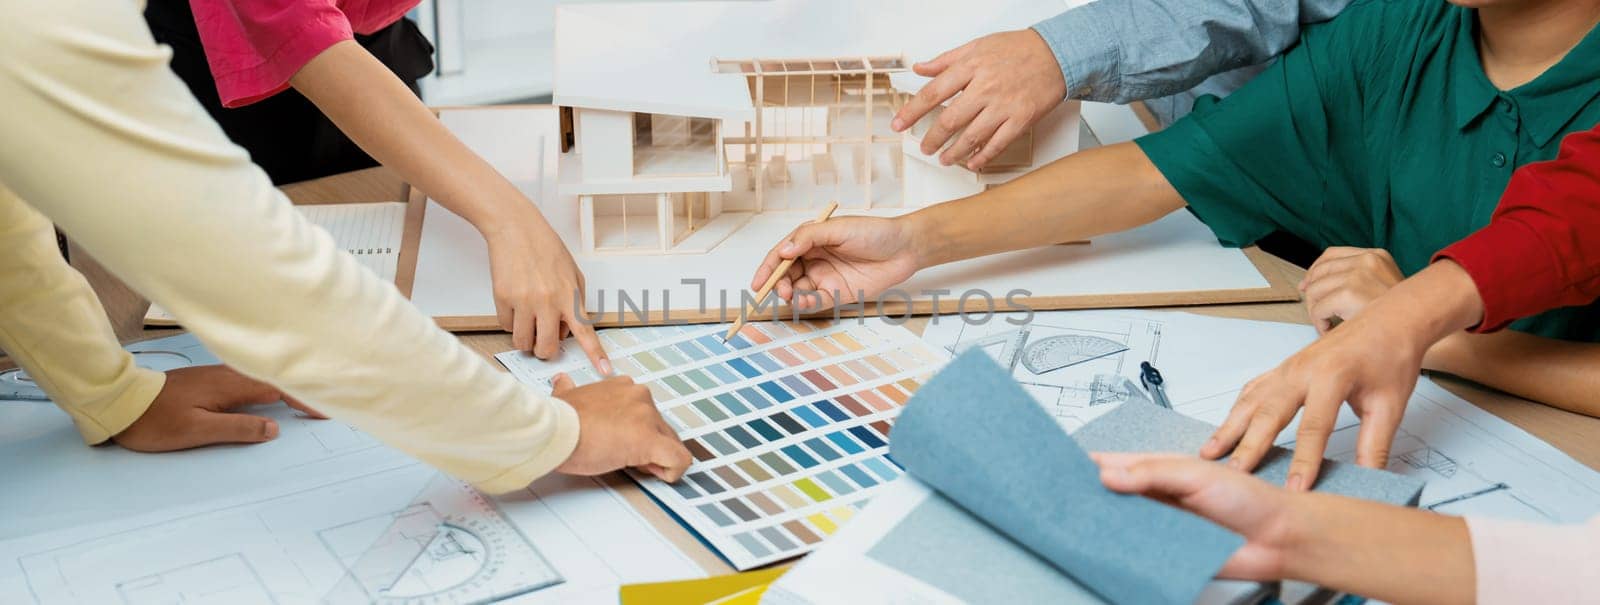 Skilled architect team discuss about house construction while interior designer point an appropriate color on color palette with house model and blueprint scatter around. Top view. Variegated.